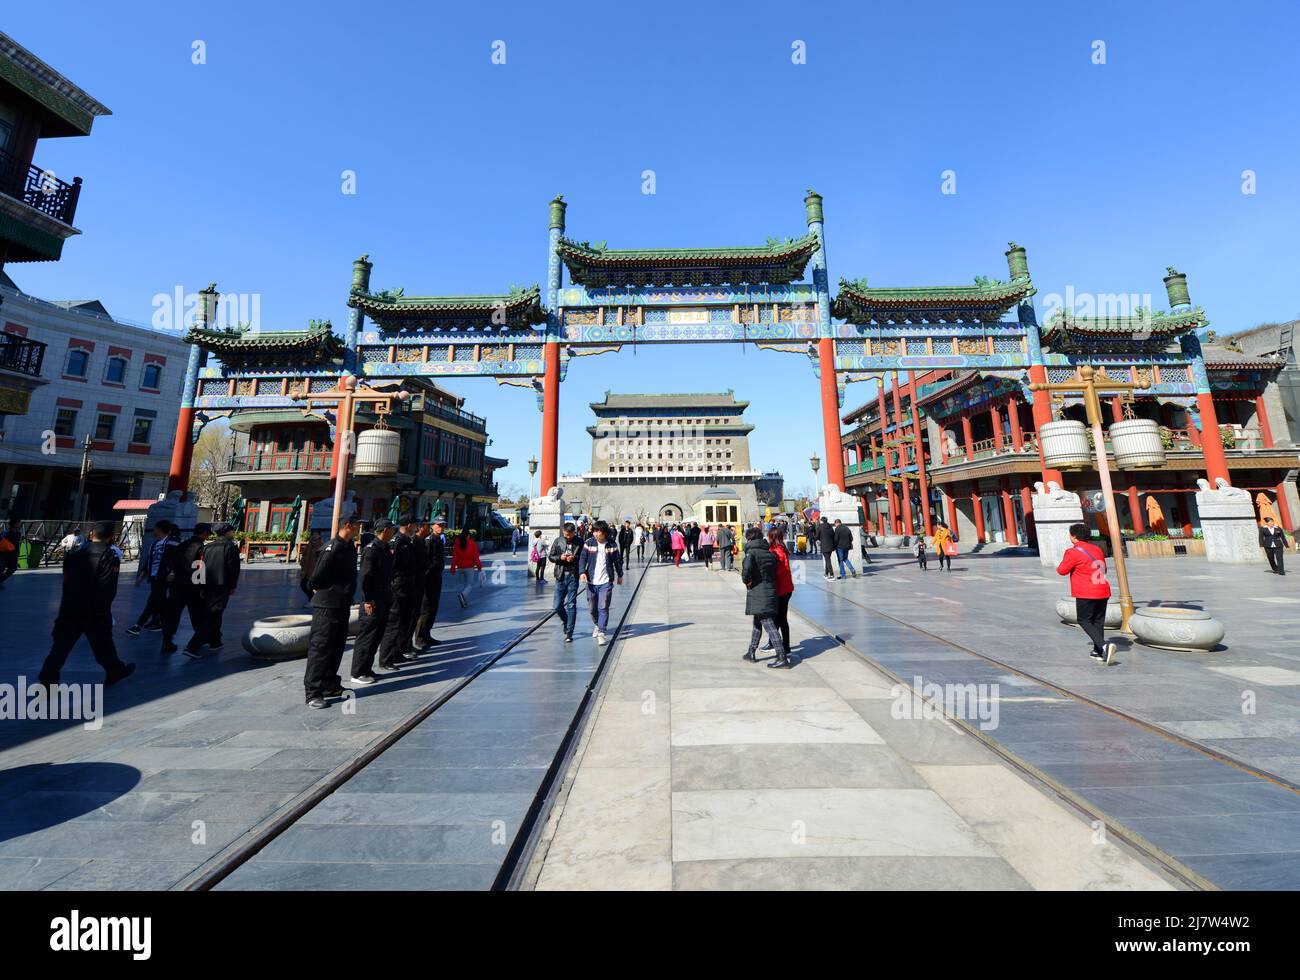 Qianmen Street is a famous pedestrian street for shopping and sightseeing. Beijing, China. Stock Photo